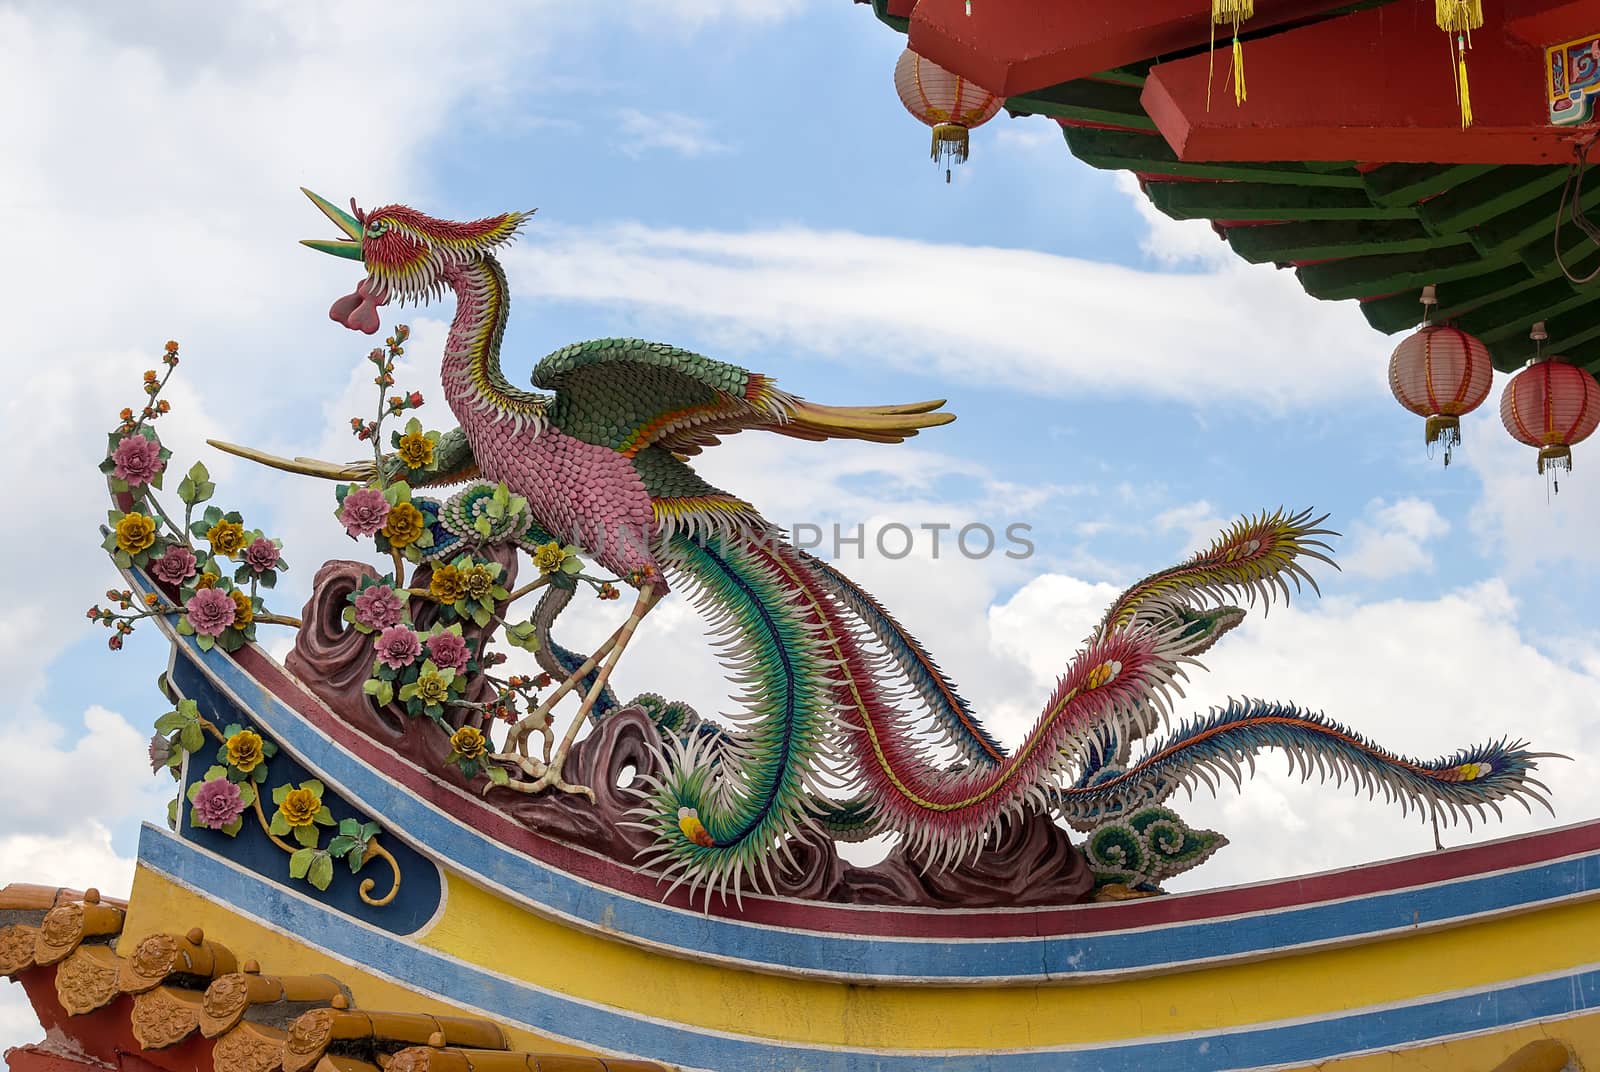 Phoenix Sculpture on Chinese Temple Roof by jpldesigns